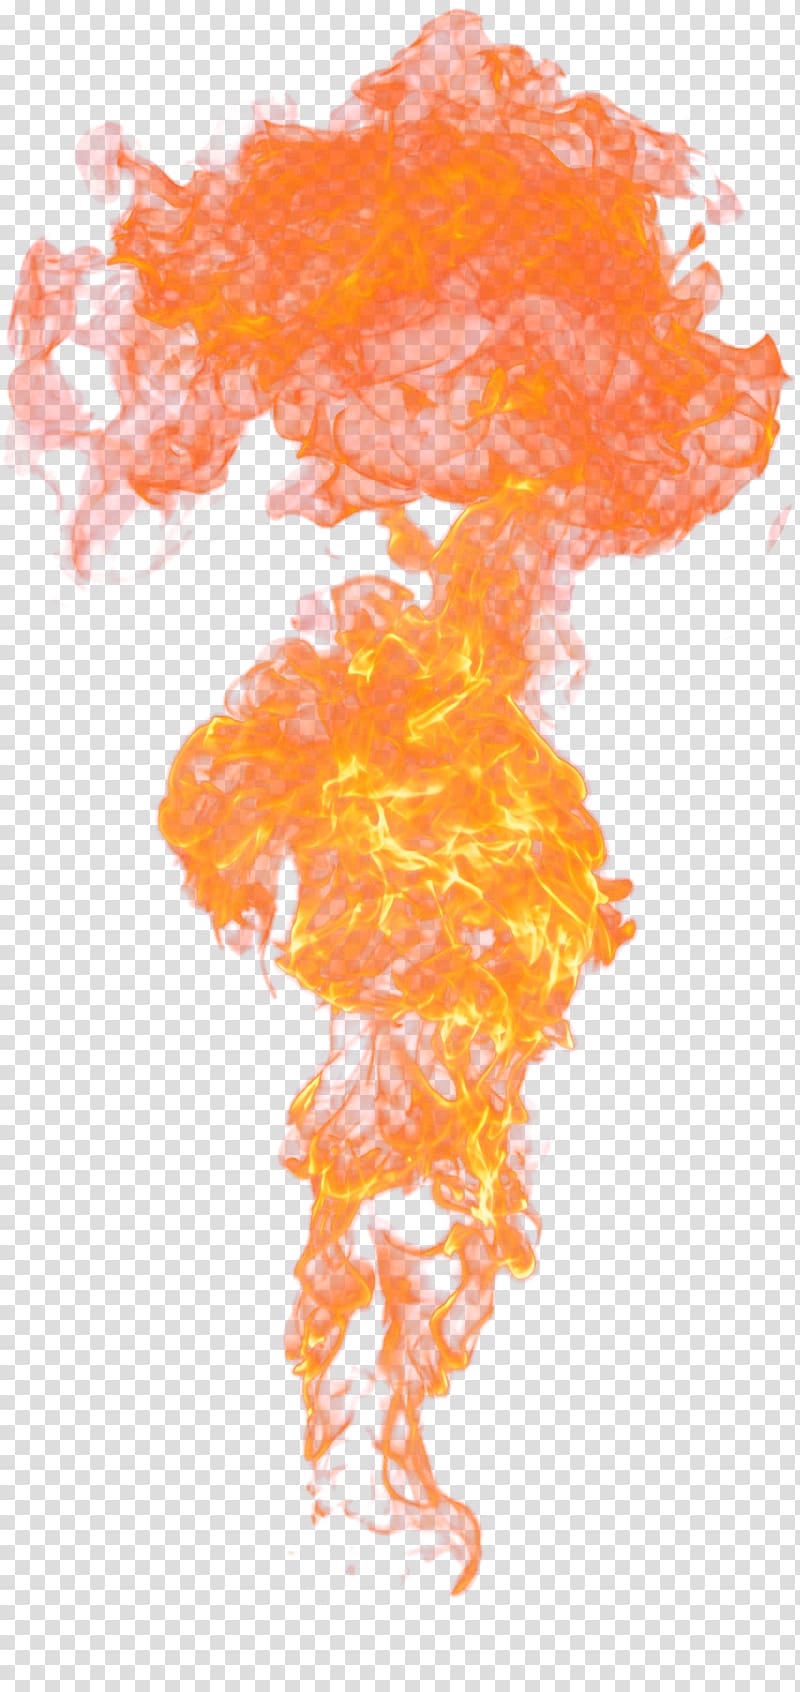 the flame of explosion transparent background PNG clipart